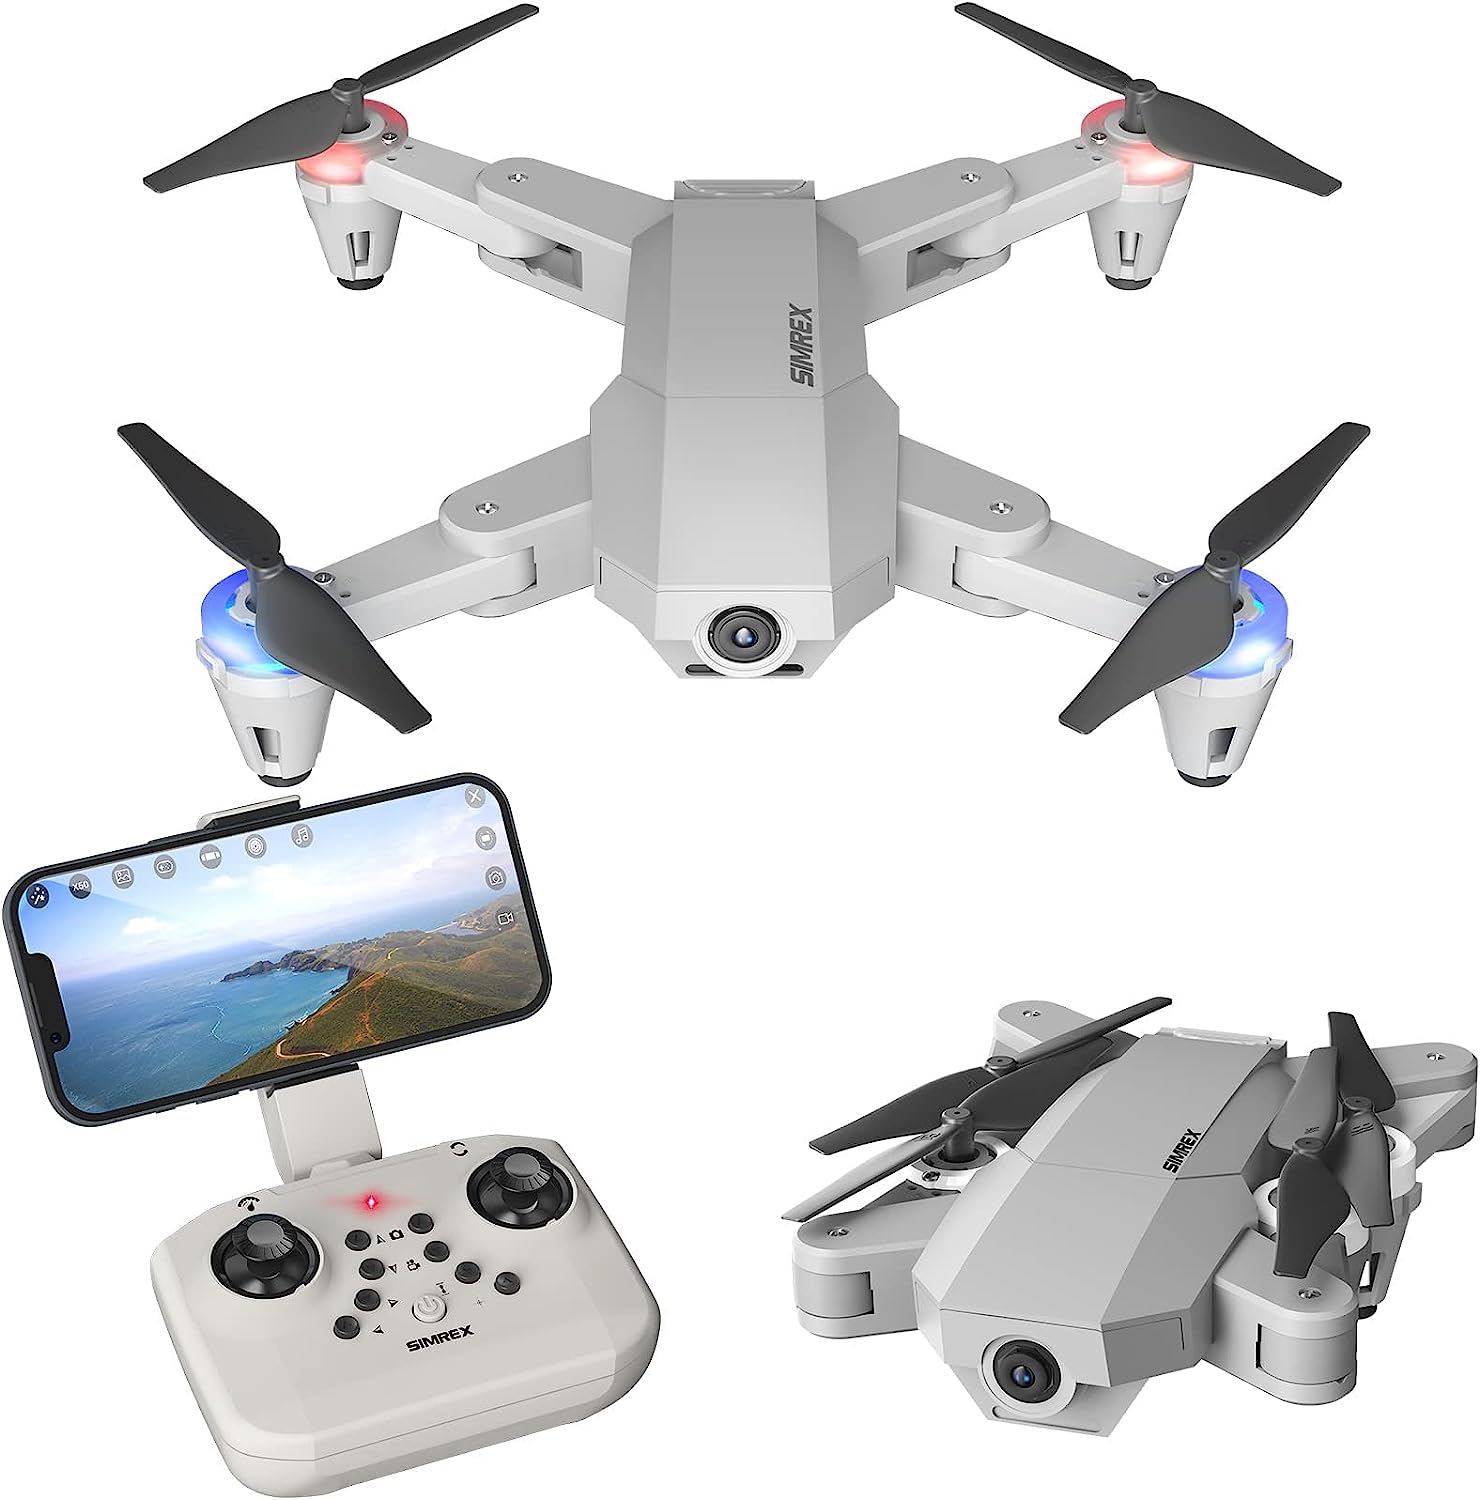 SIMREX X500 mini Drone Optical Flow Positioning RC Quadcopter with 720P HD Camera, Altitude Hold Headless Mode, Foldable FPV Drones WiFi Live Video 3D Flips Easy Fly Steady for Learning Dark Gray